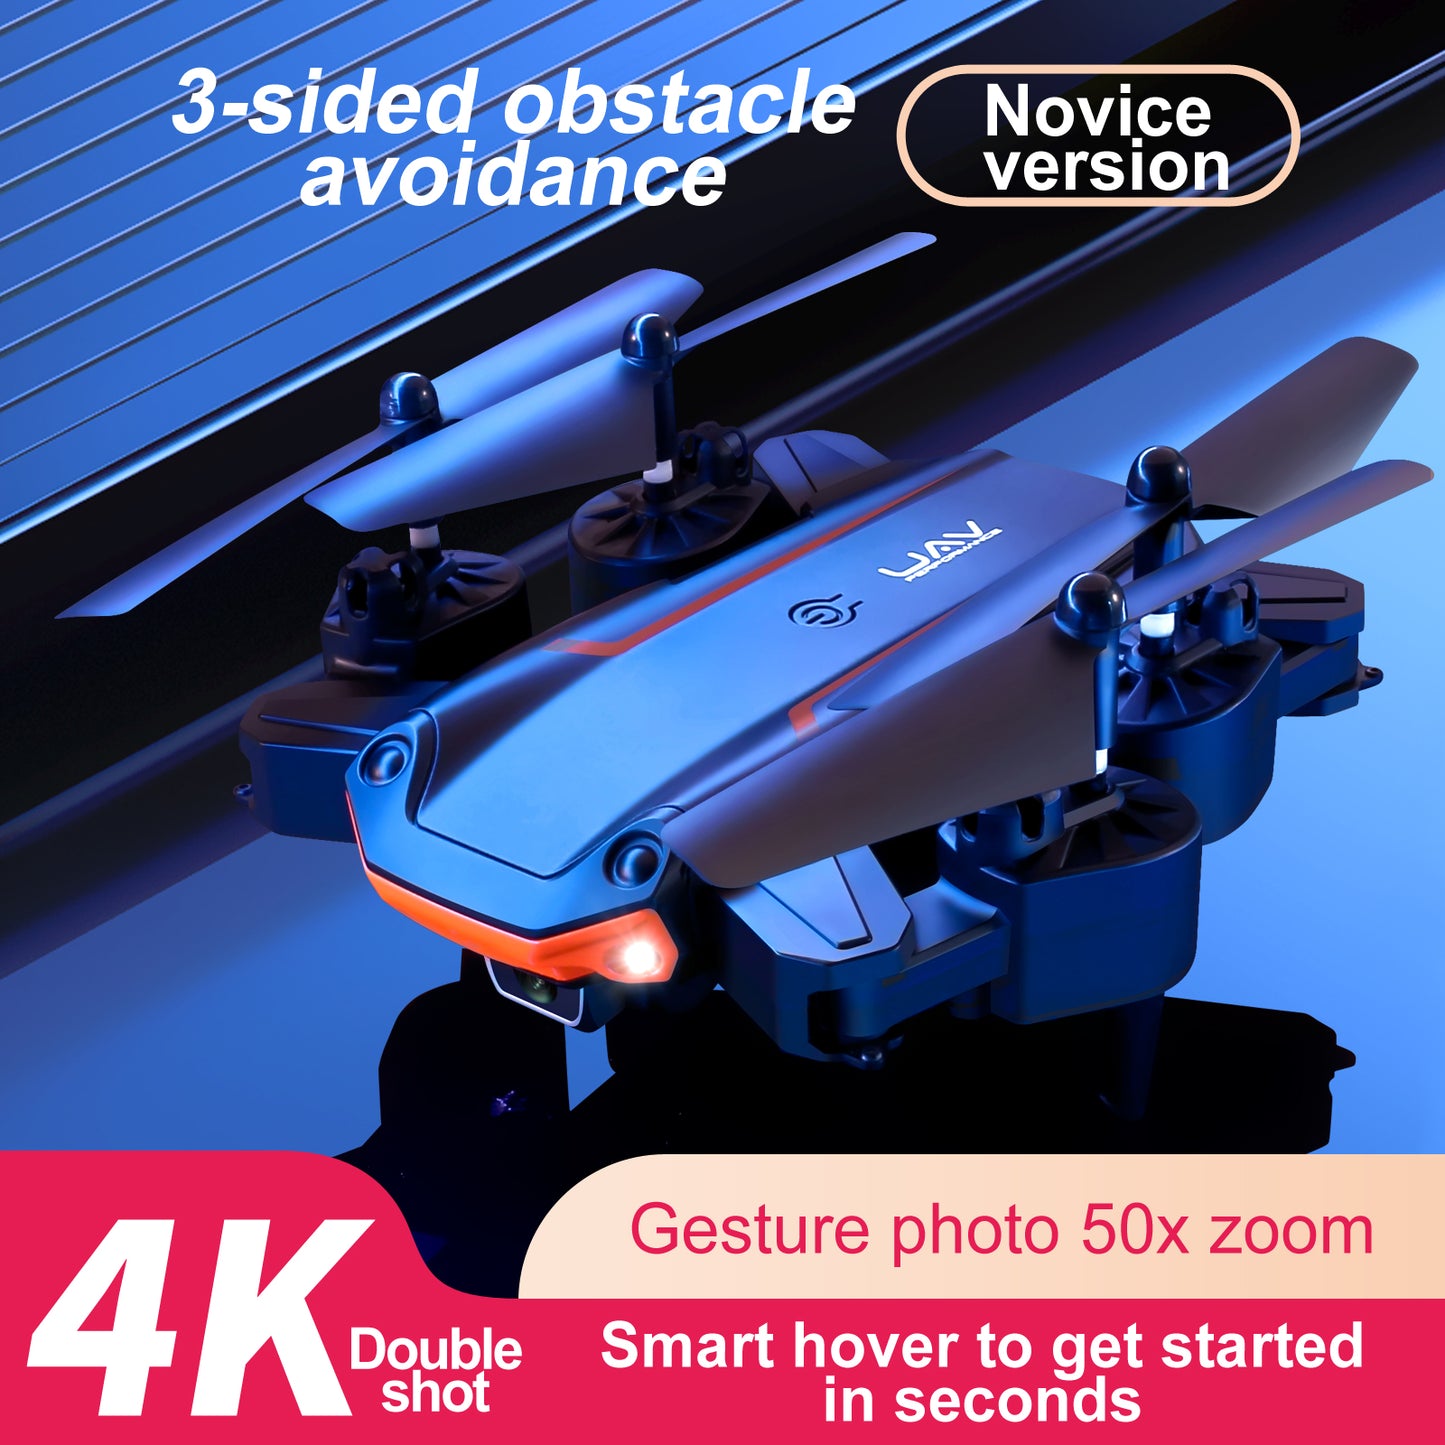 Professional toy drone KY603 4K